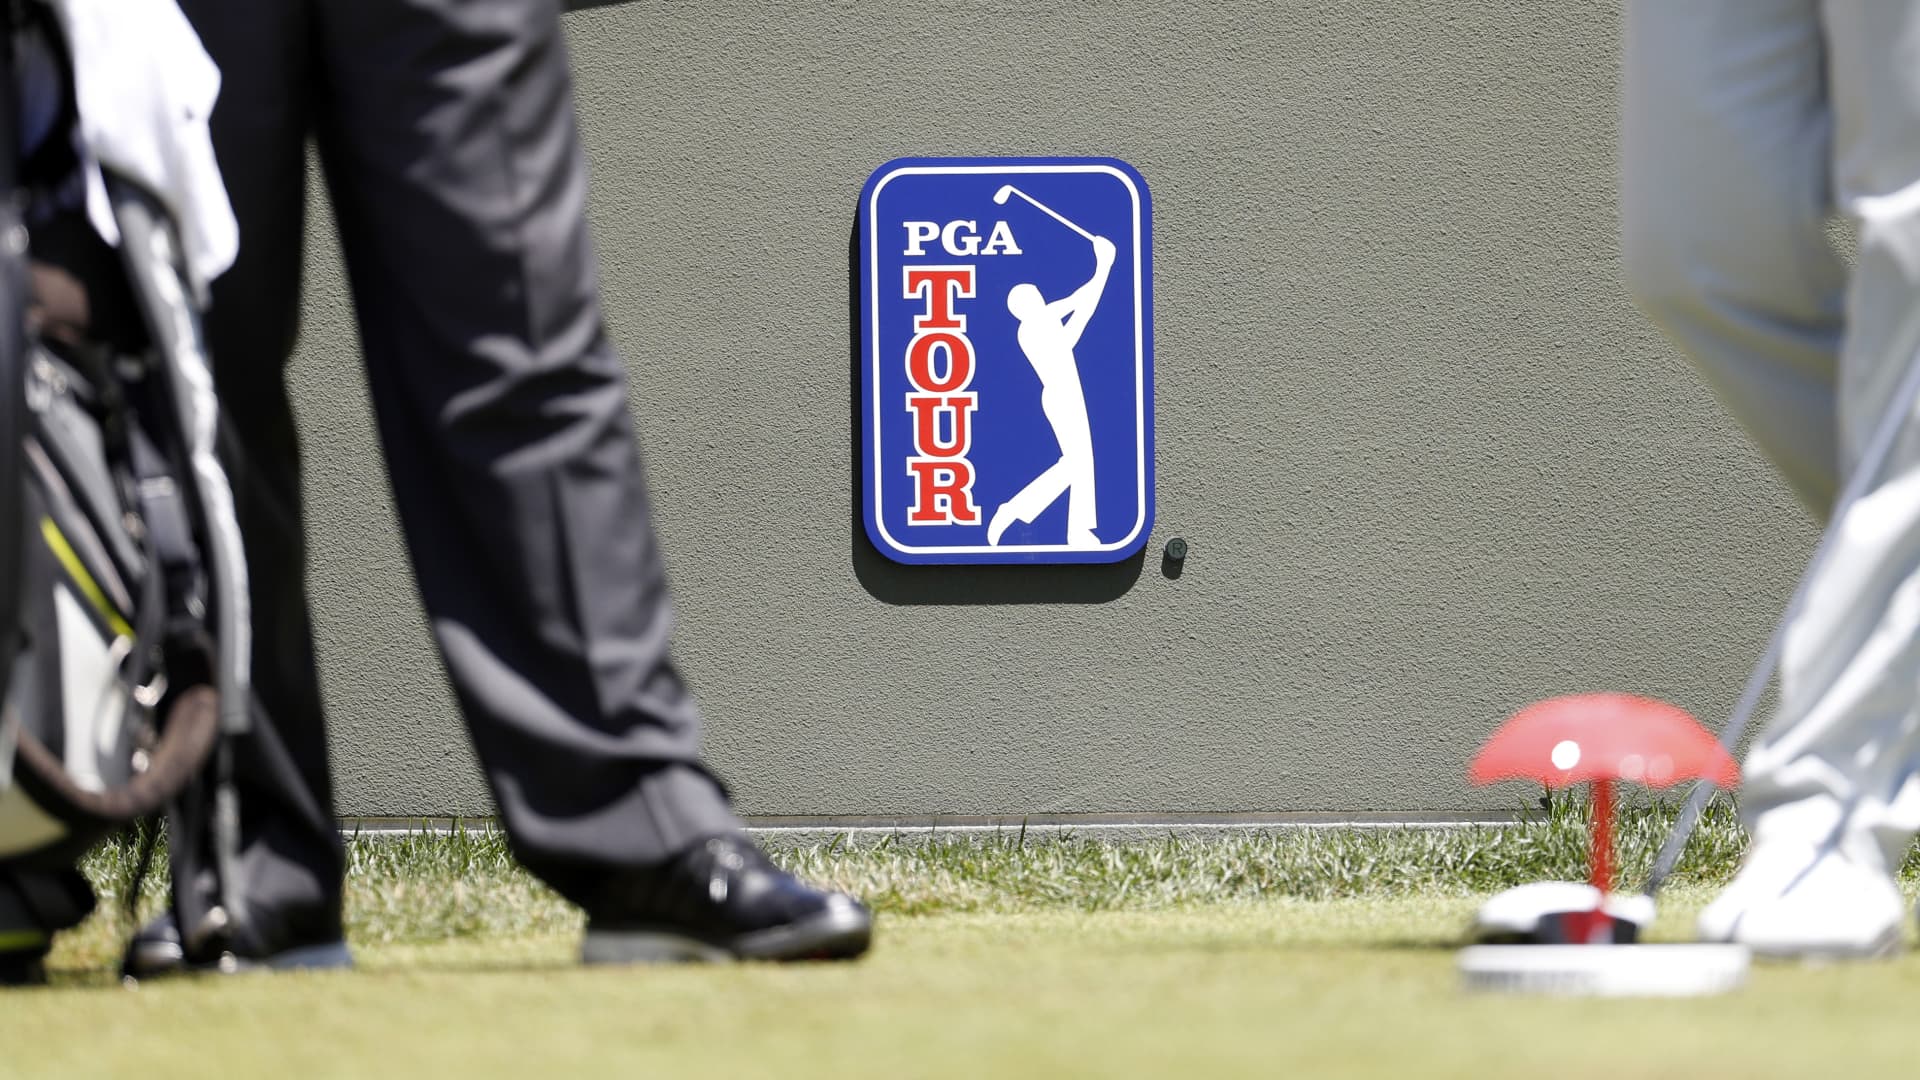 justice-department-investigating-pga-tour-for-possible-antitrust-violations-tied-to-liv-golf